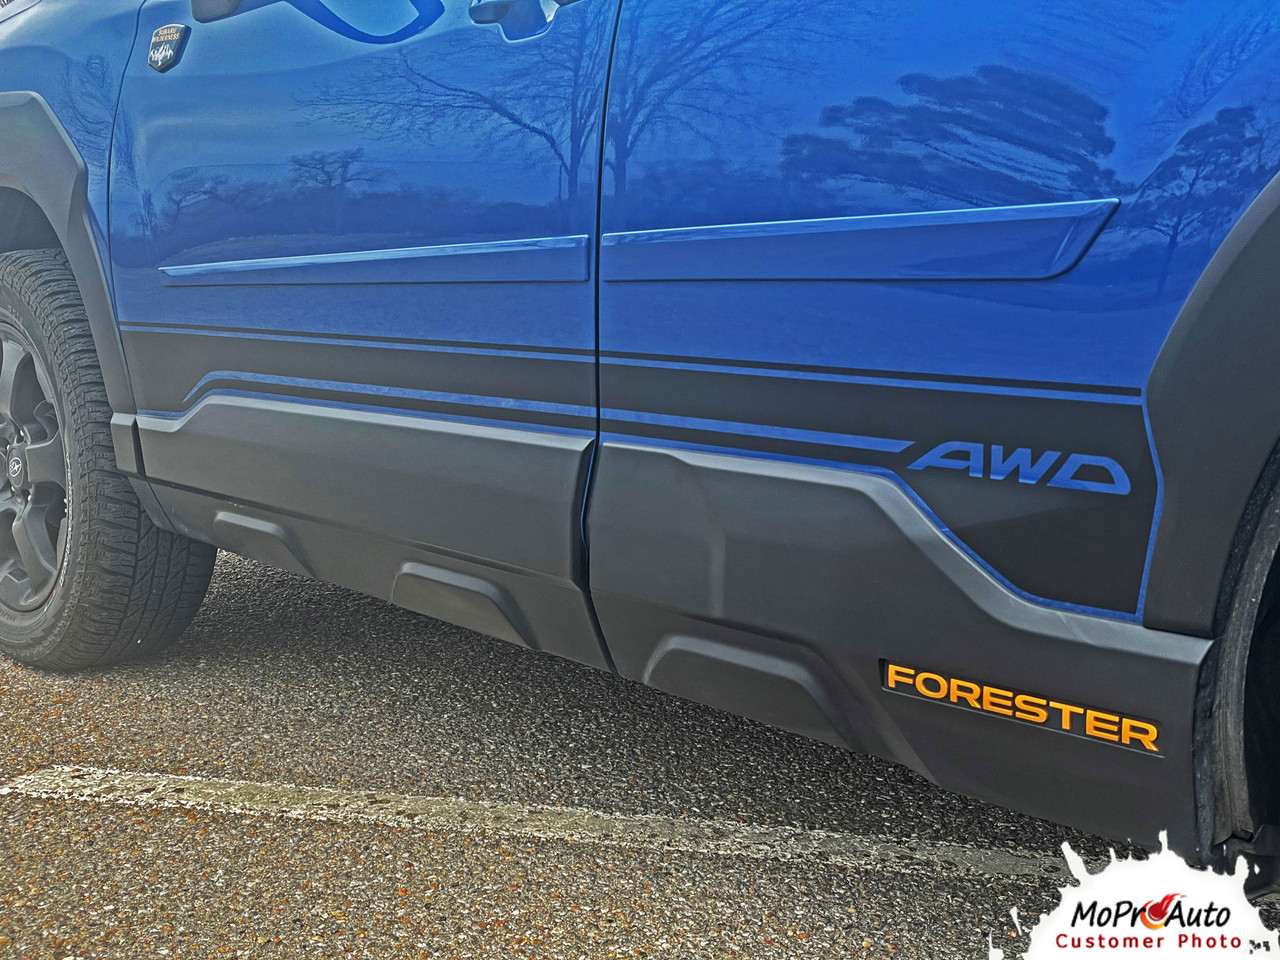 GROOVE SIDES - Subaru Forester 3M 2080 Vinyl Graphics, Stripes and Decals Package by MoProAuto Pro Design Series